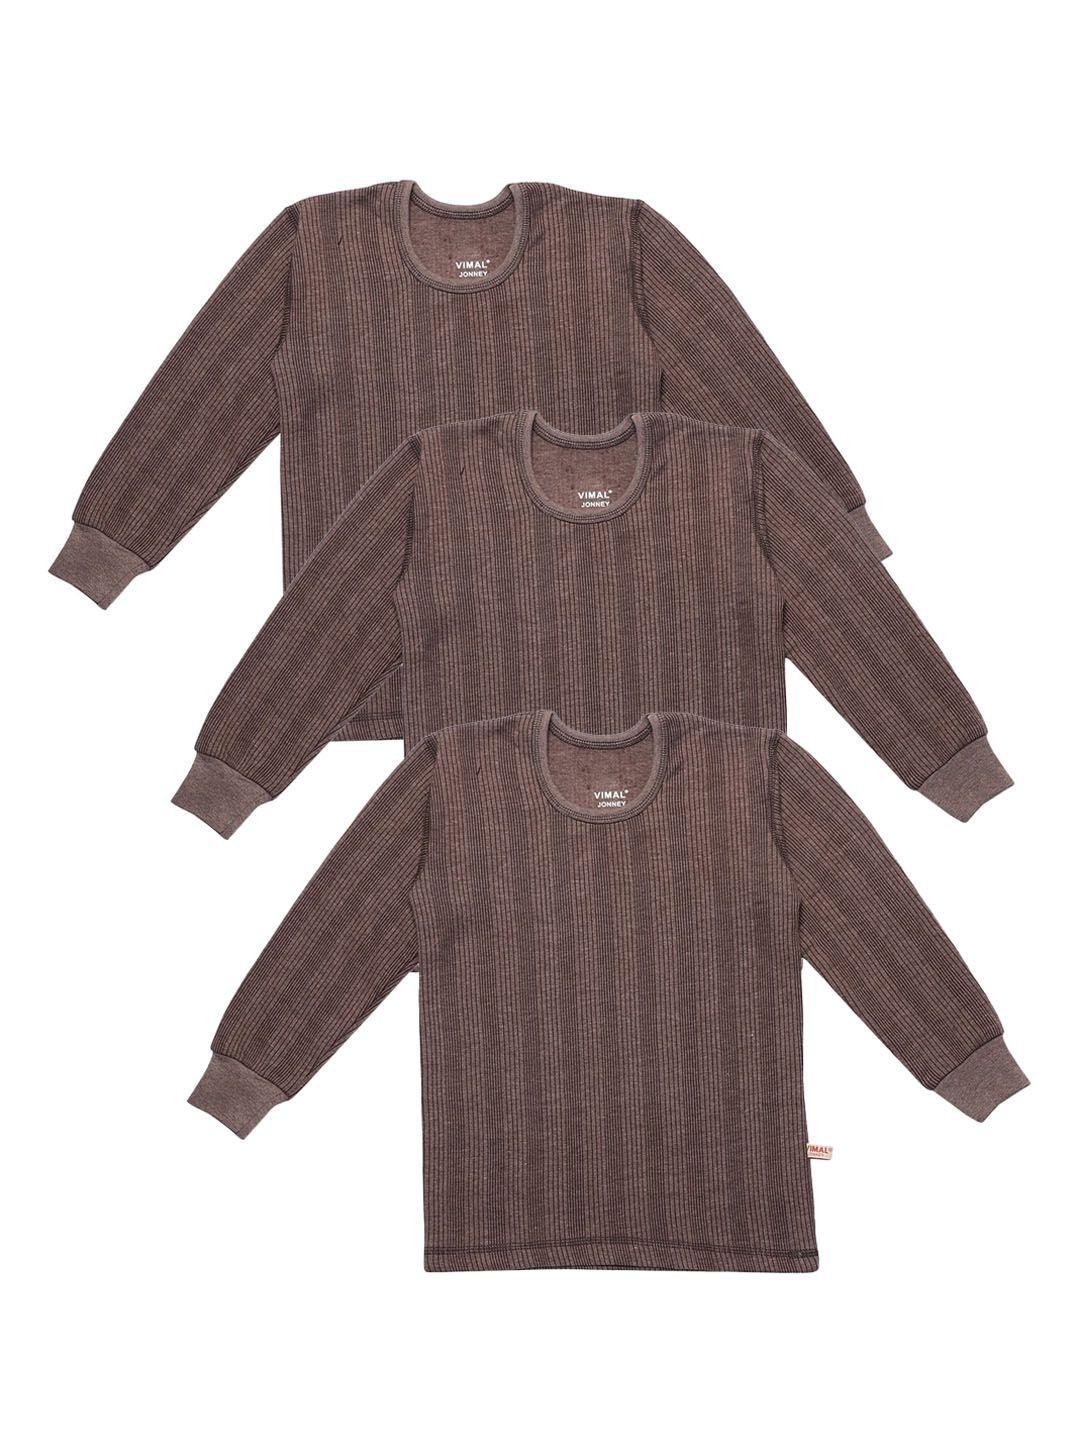 vimal jonney kids pack of 3 striped cotton thermal tops